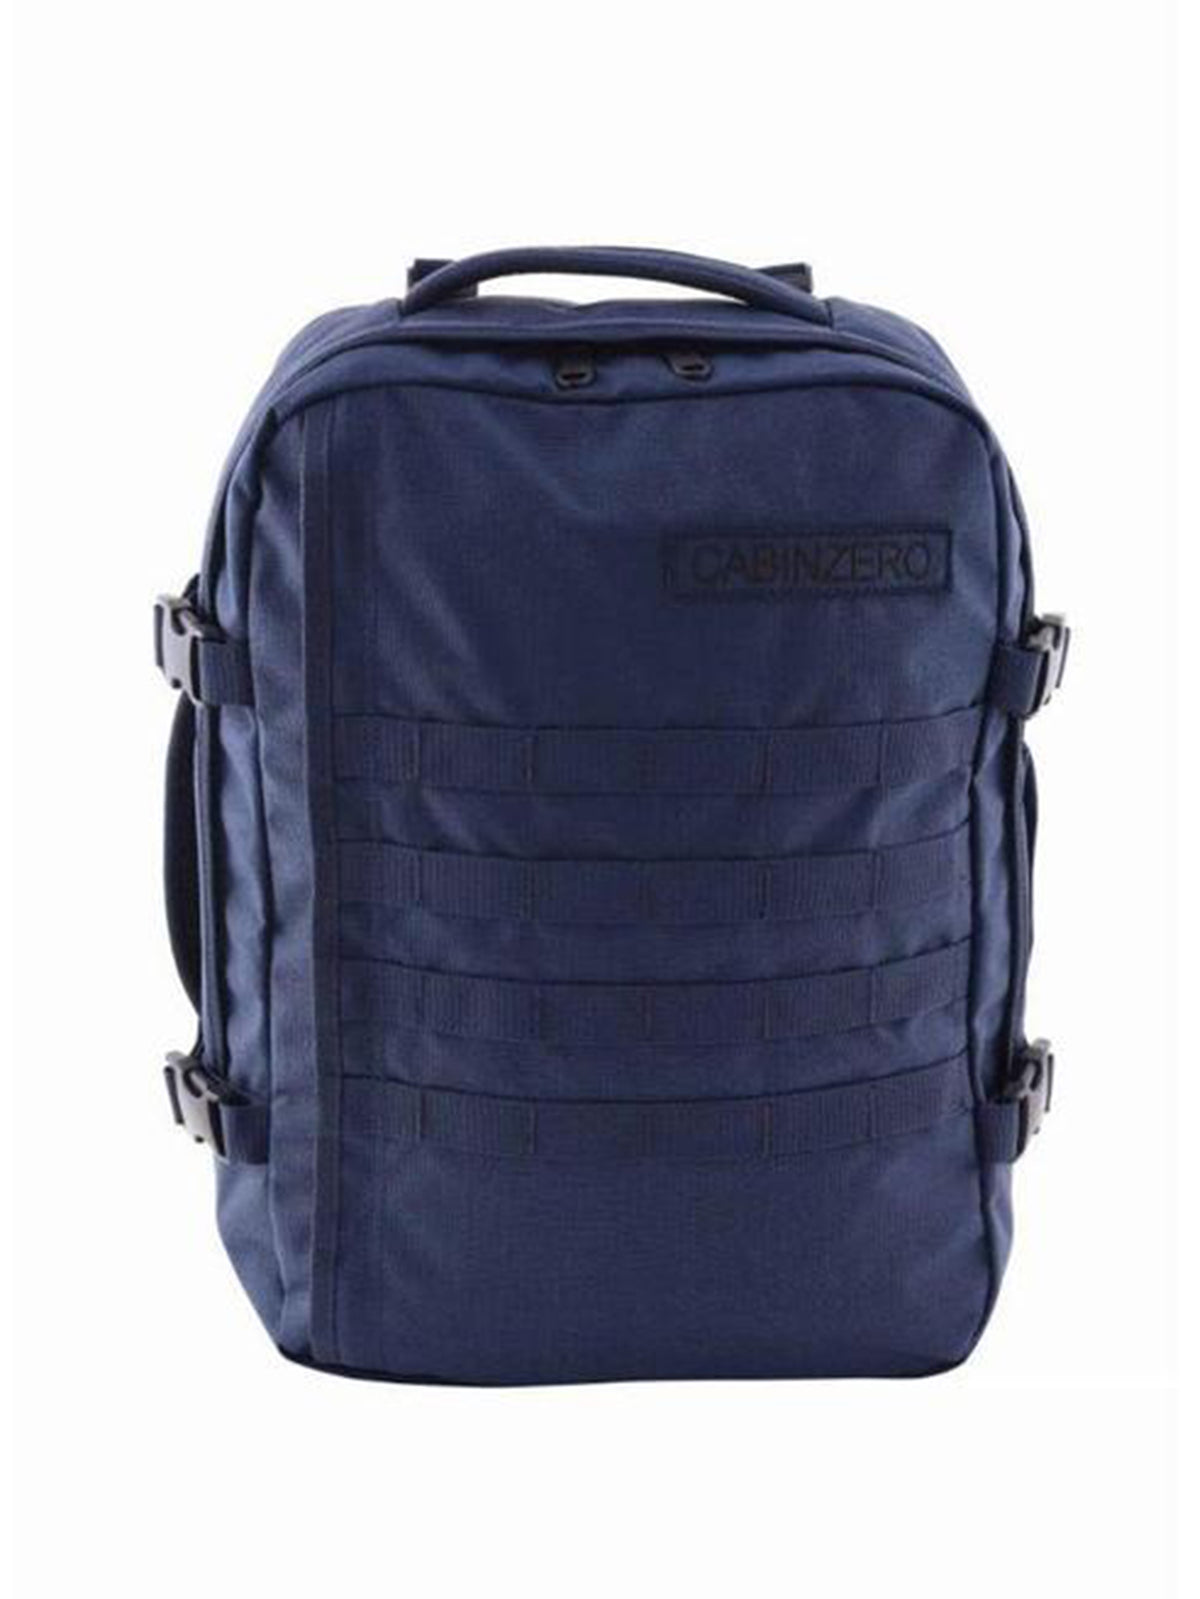 Cabinzero Military 28L in Military Black Color – THIS IS FOR HIM